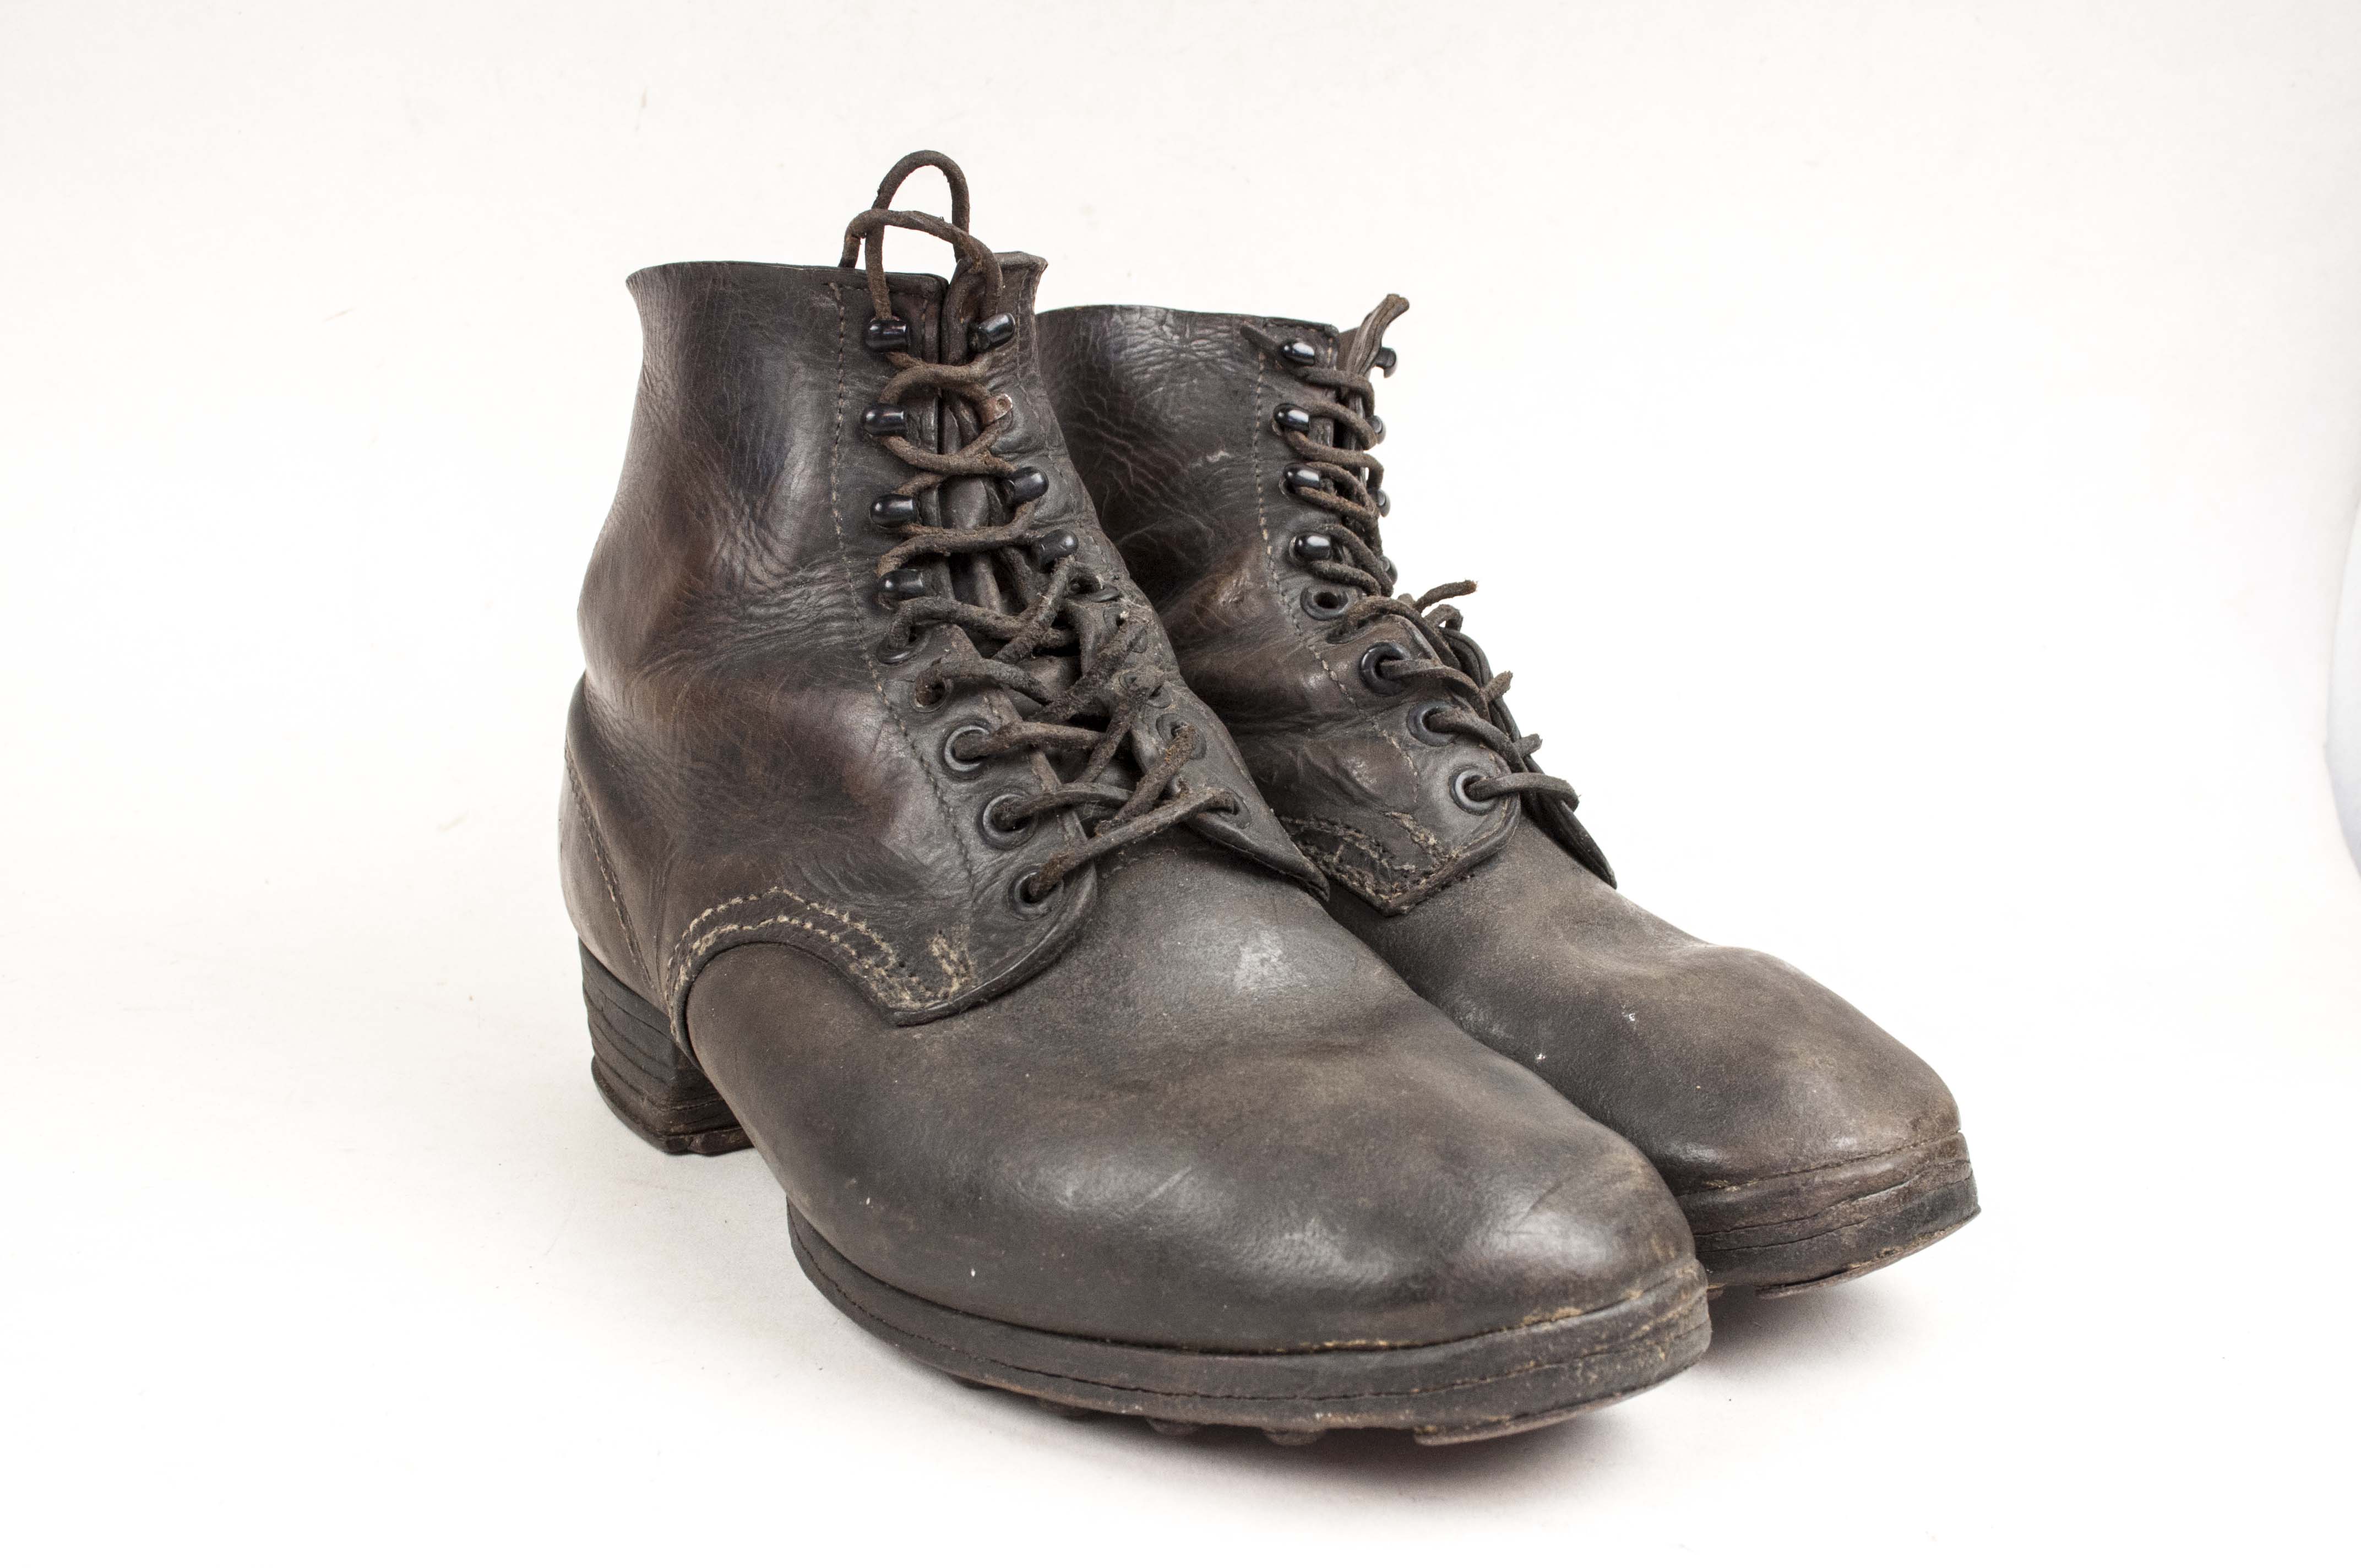 M37 ankle boots in good used condition – fjm44